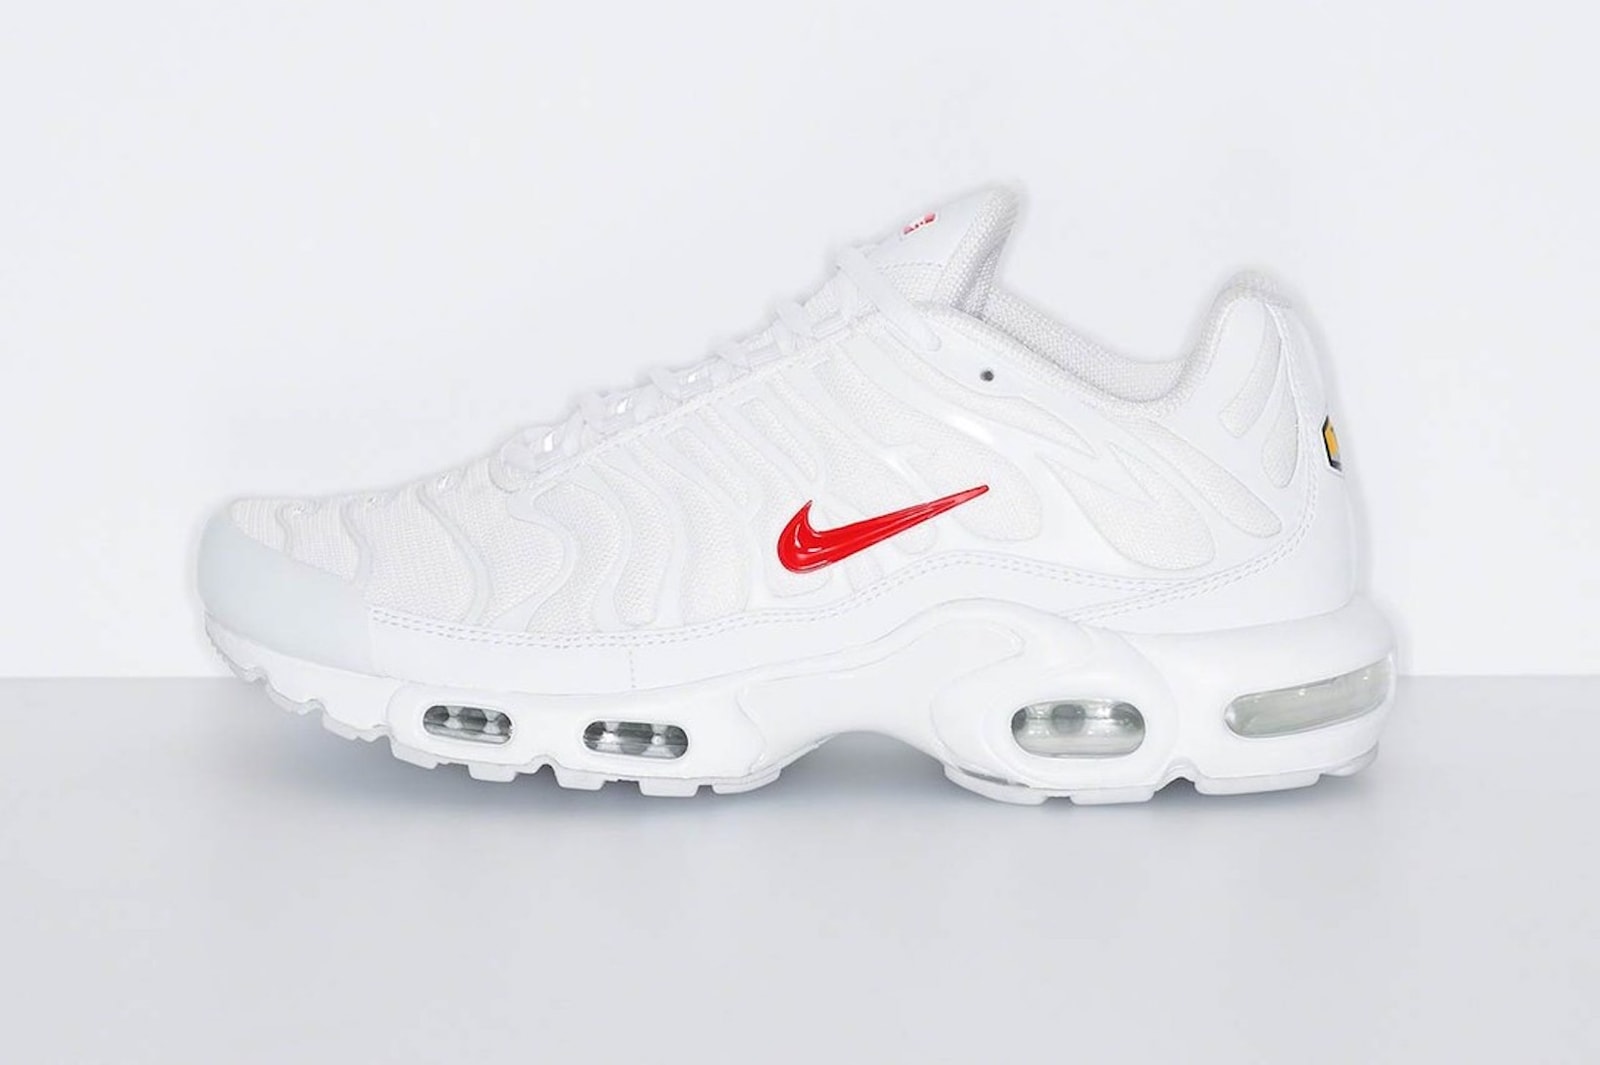 supreme nike air max plus collaboration sneakers white red shoes footwear sneakerhead